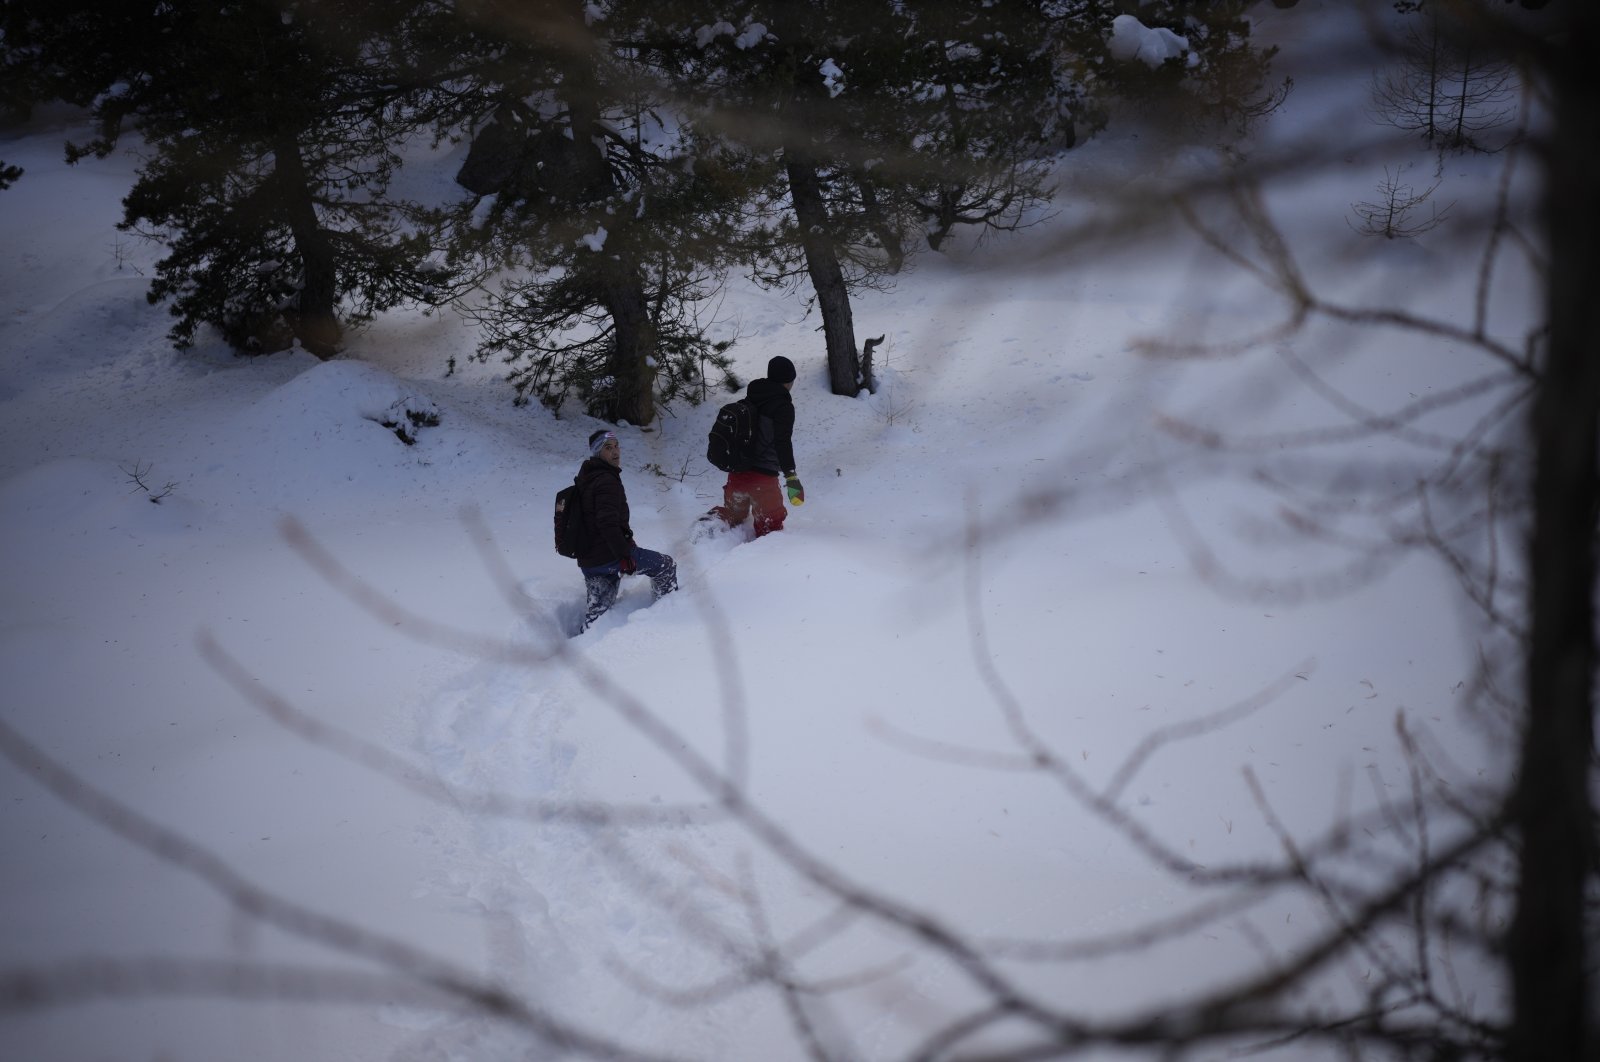 Afghan migrants Ali Rezaie (R) and Sayed Hamza trek through the French-Italian Alps to reach a migrant refuge in Briancon, France, Dec. 12, 2021. (AP Photo)